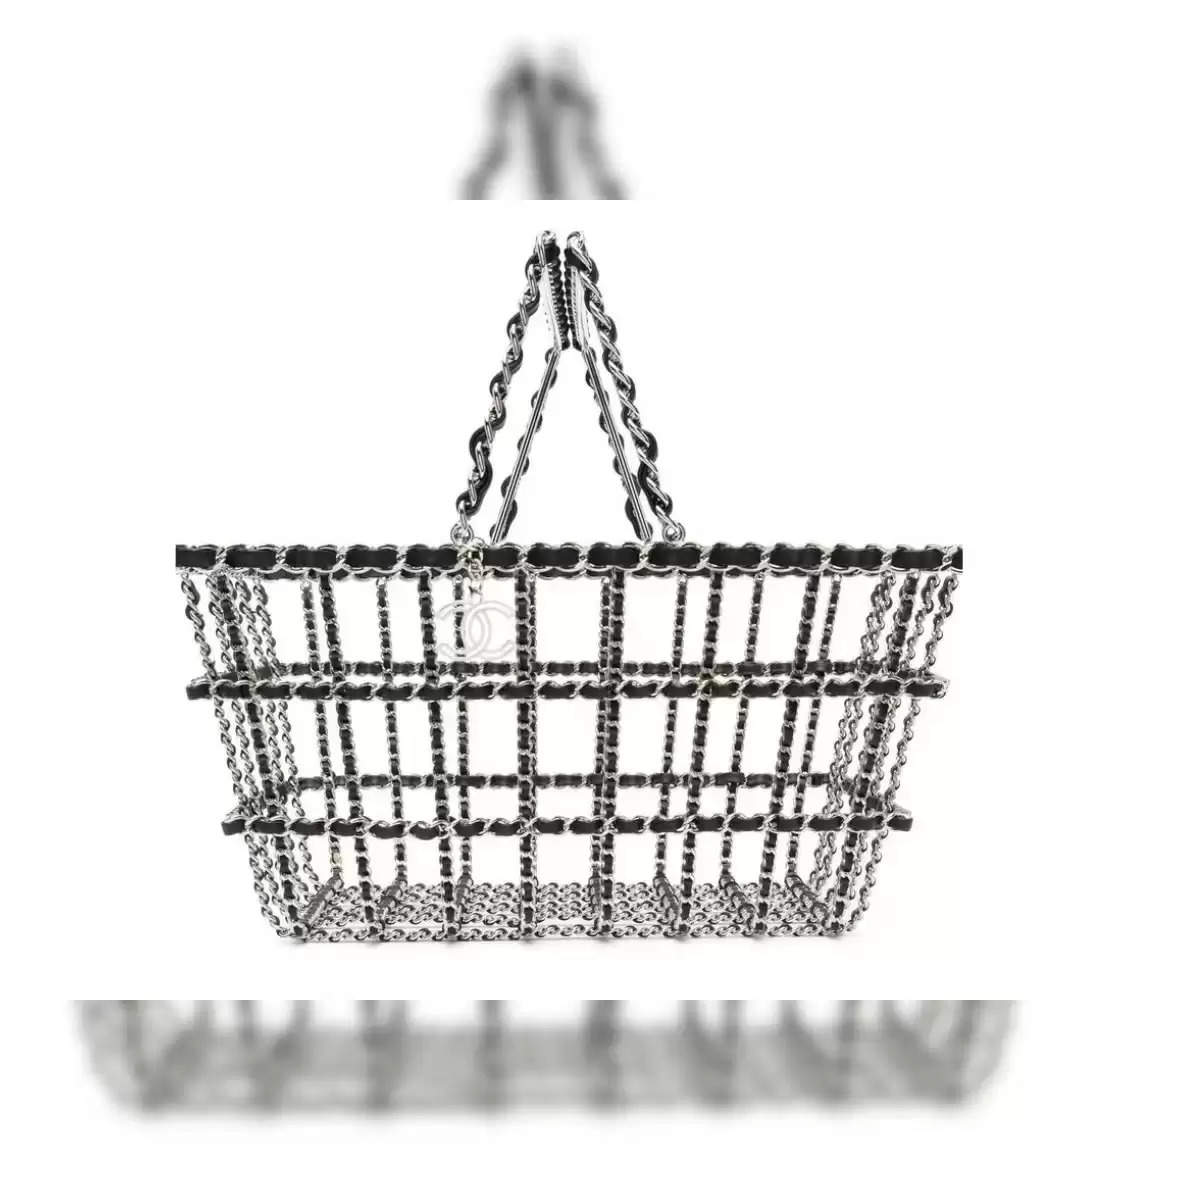 Outrageous or Ingenious? Chanel's ₹86 Lakh Shopping Basket Divides Internet Opinion.